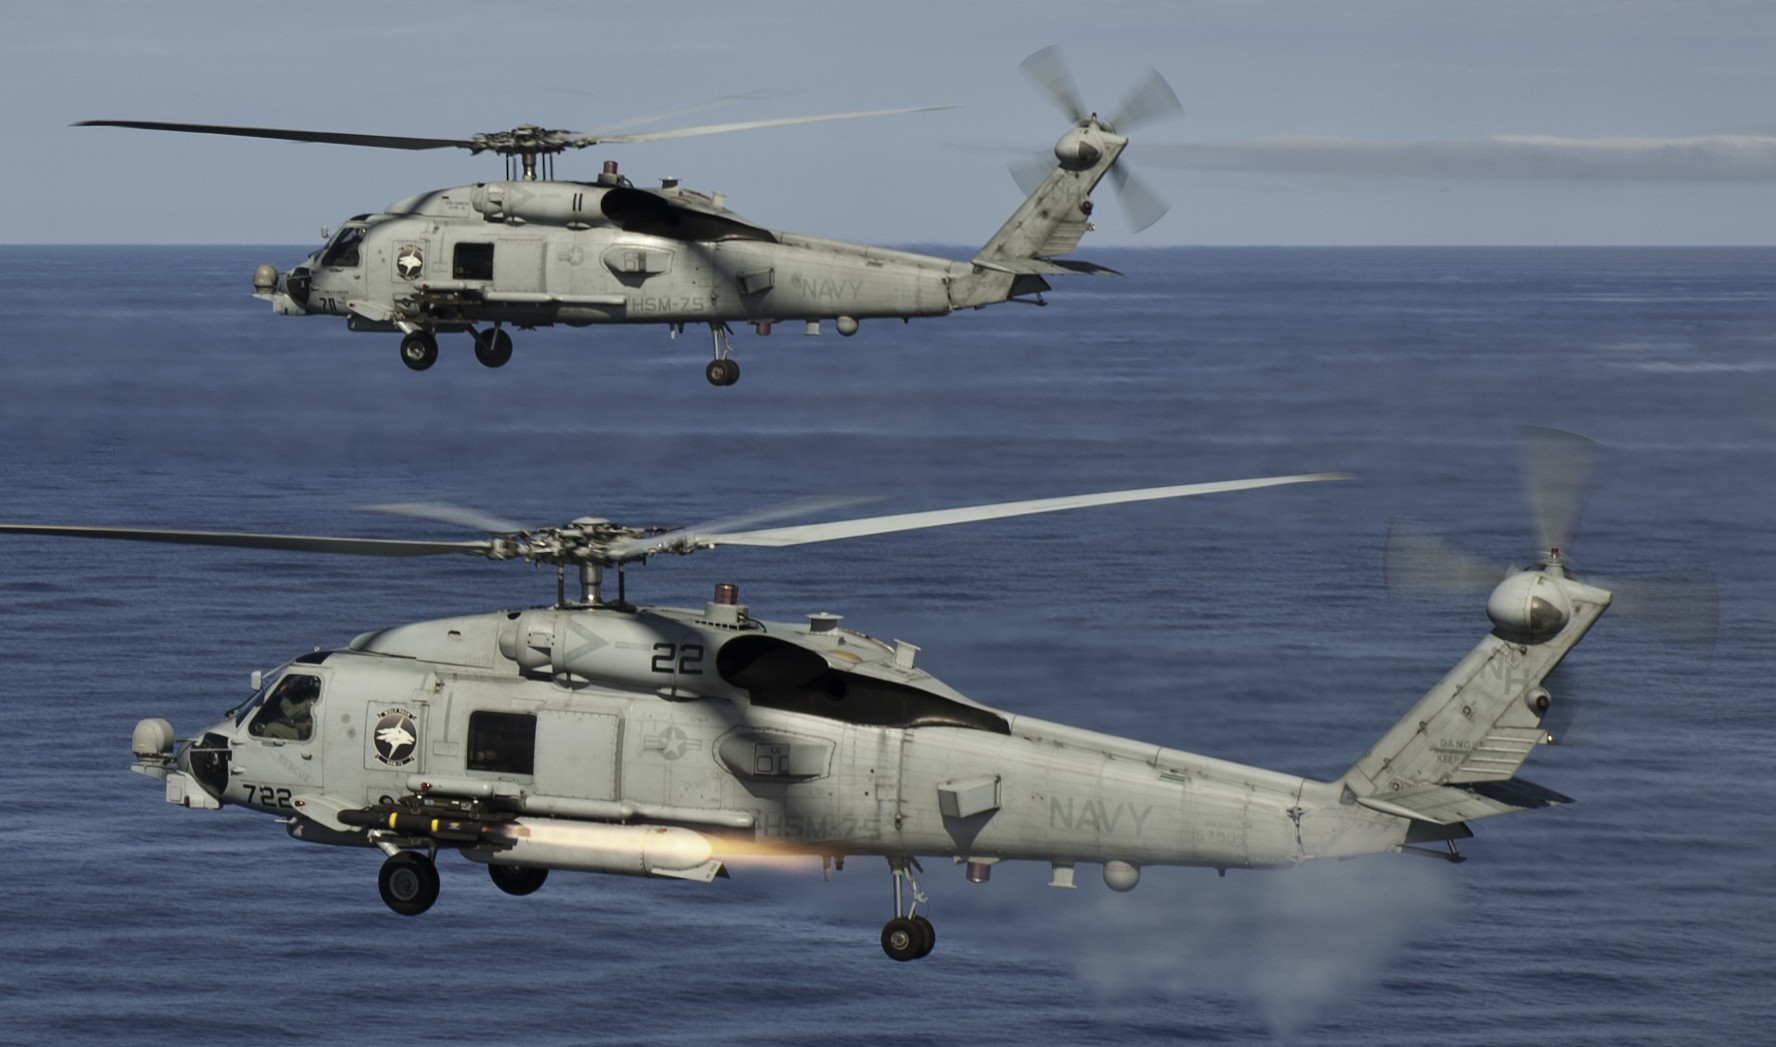 hsm-75 wolf pack helicopter maritime strike squadron mh-60r seahawk agm-114 hellfire missile 29